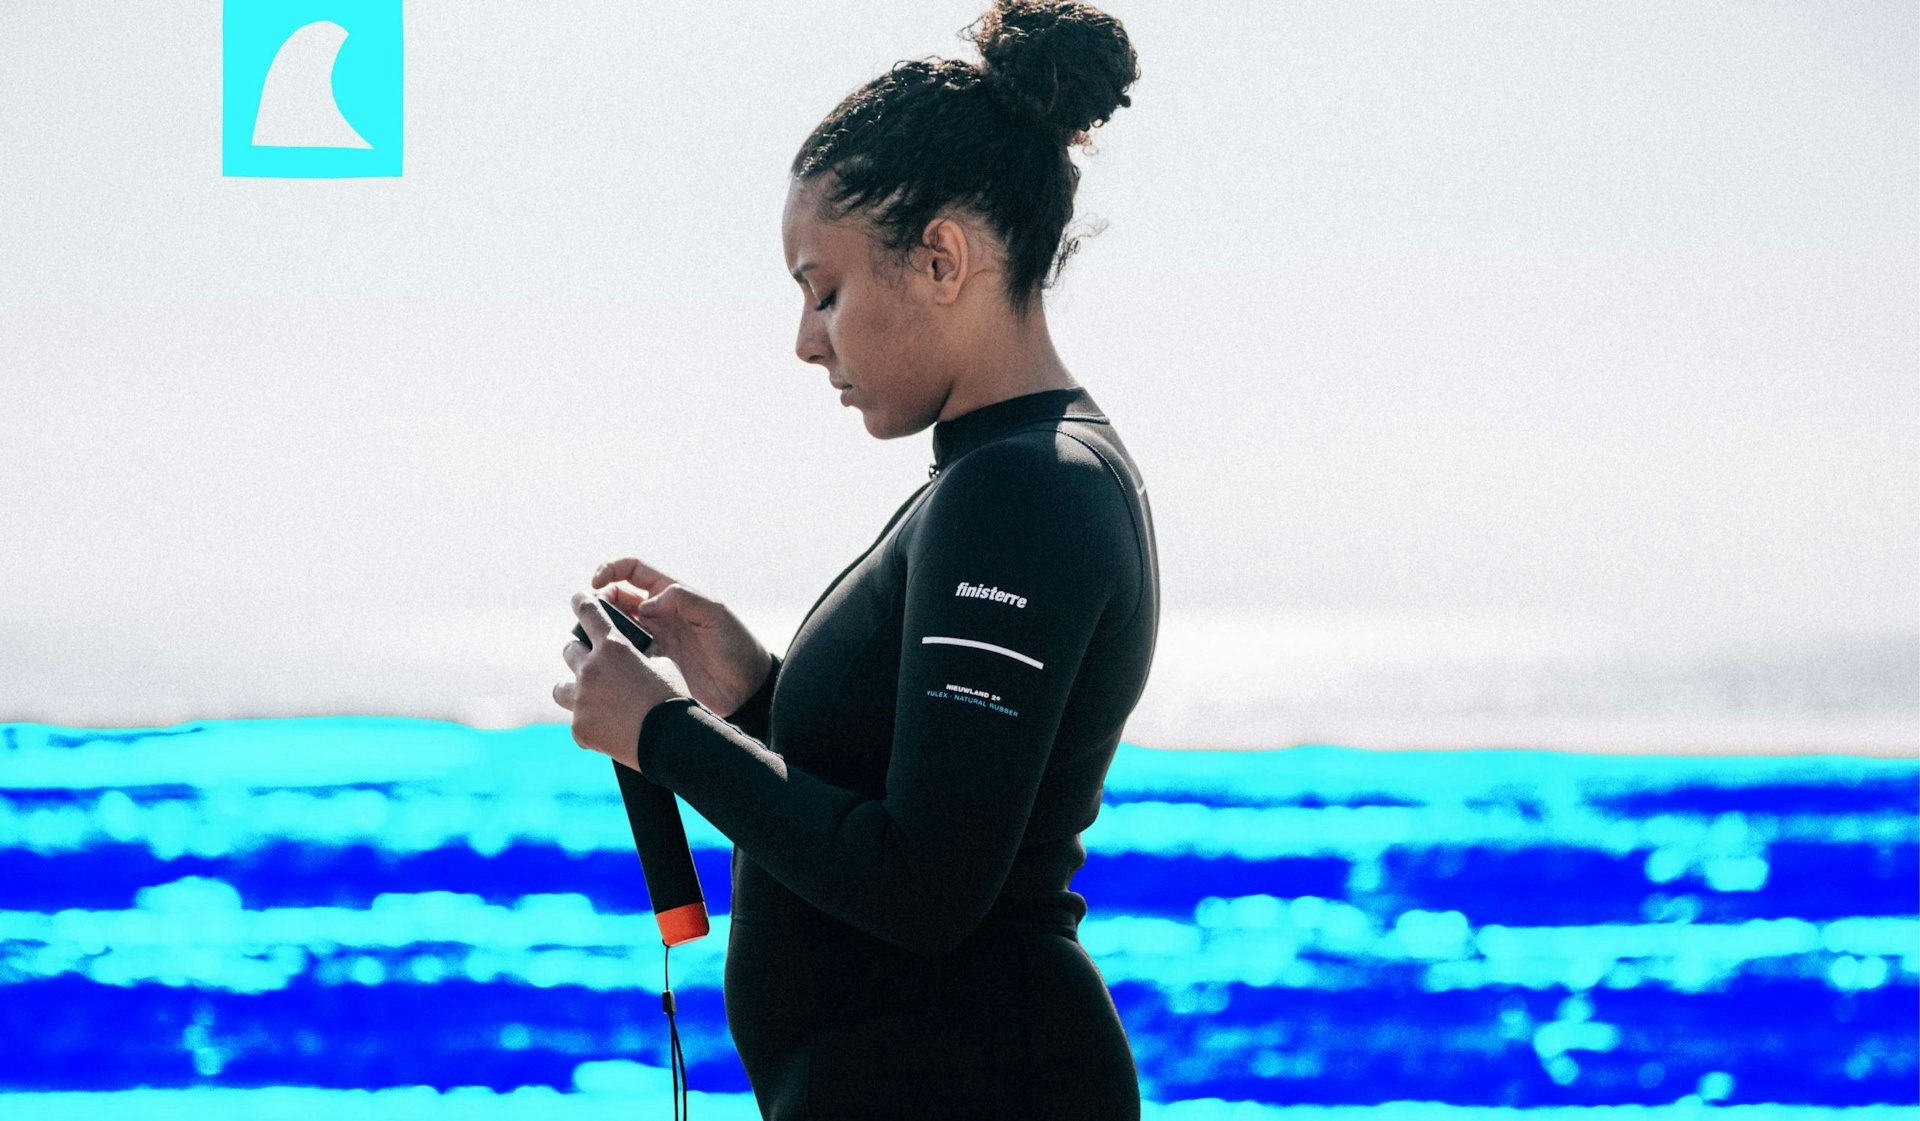 Finisterre are championing an ocean that’s for everyone